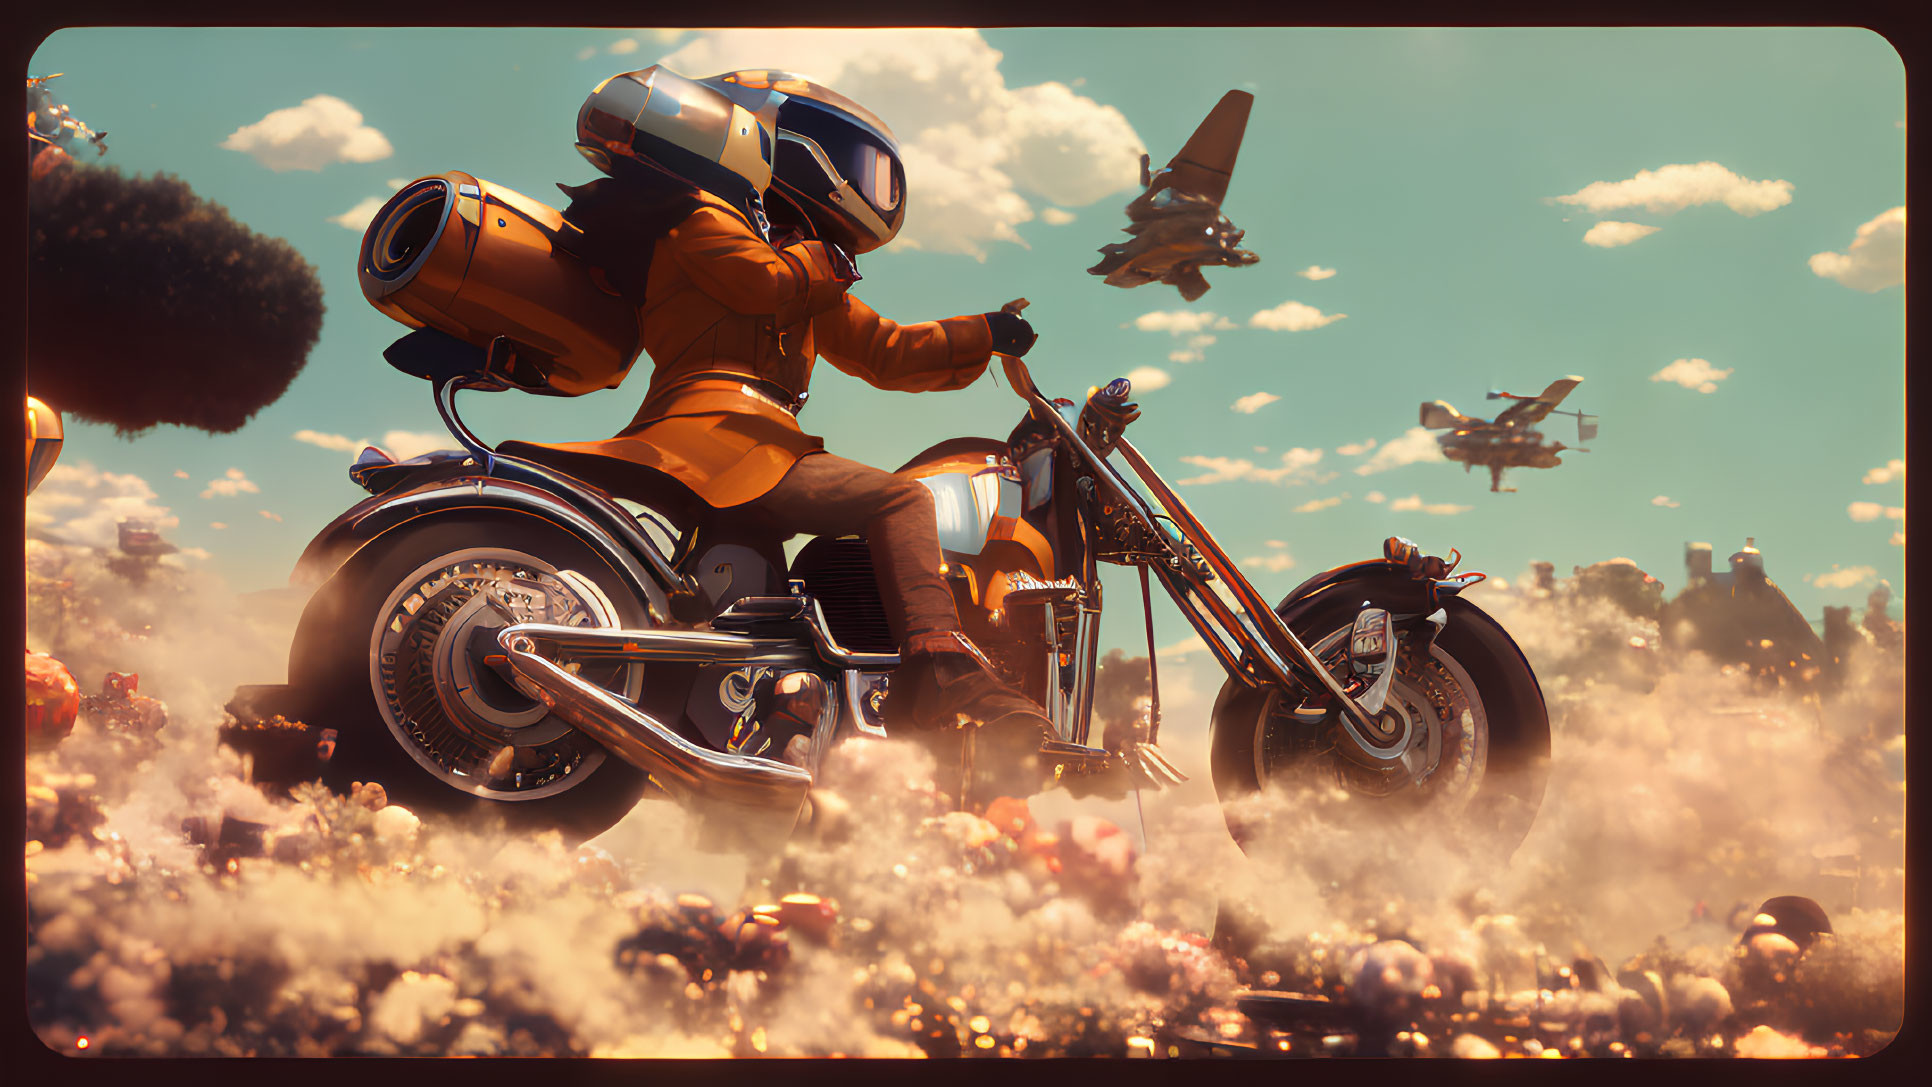 Futuristic person on motorcycle in vibrant floral landscape